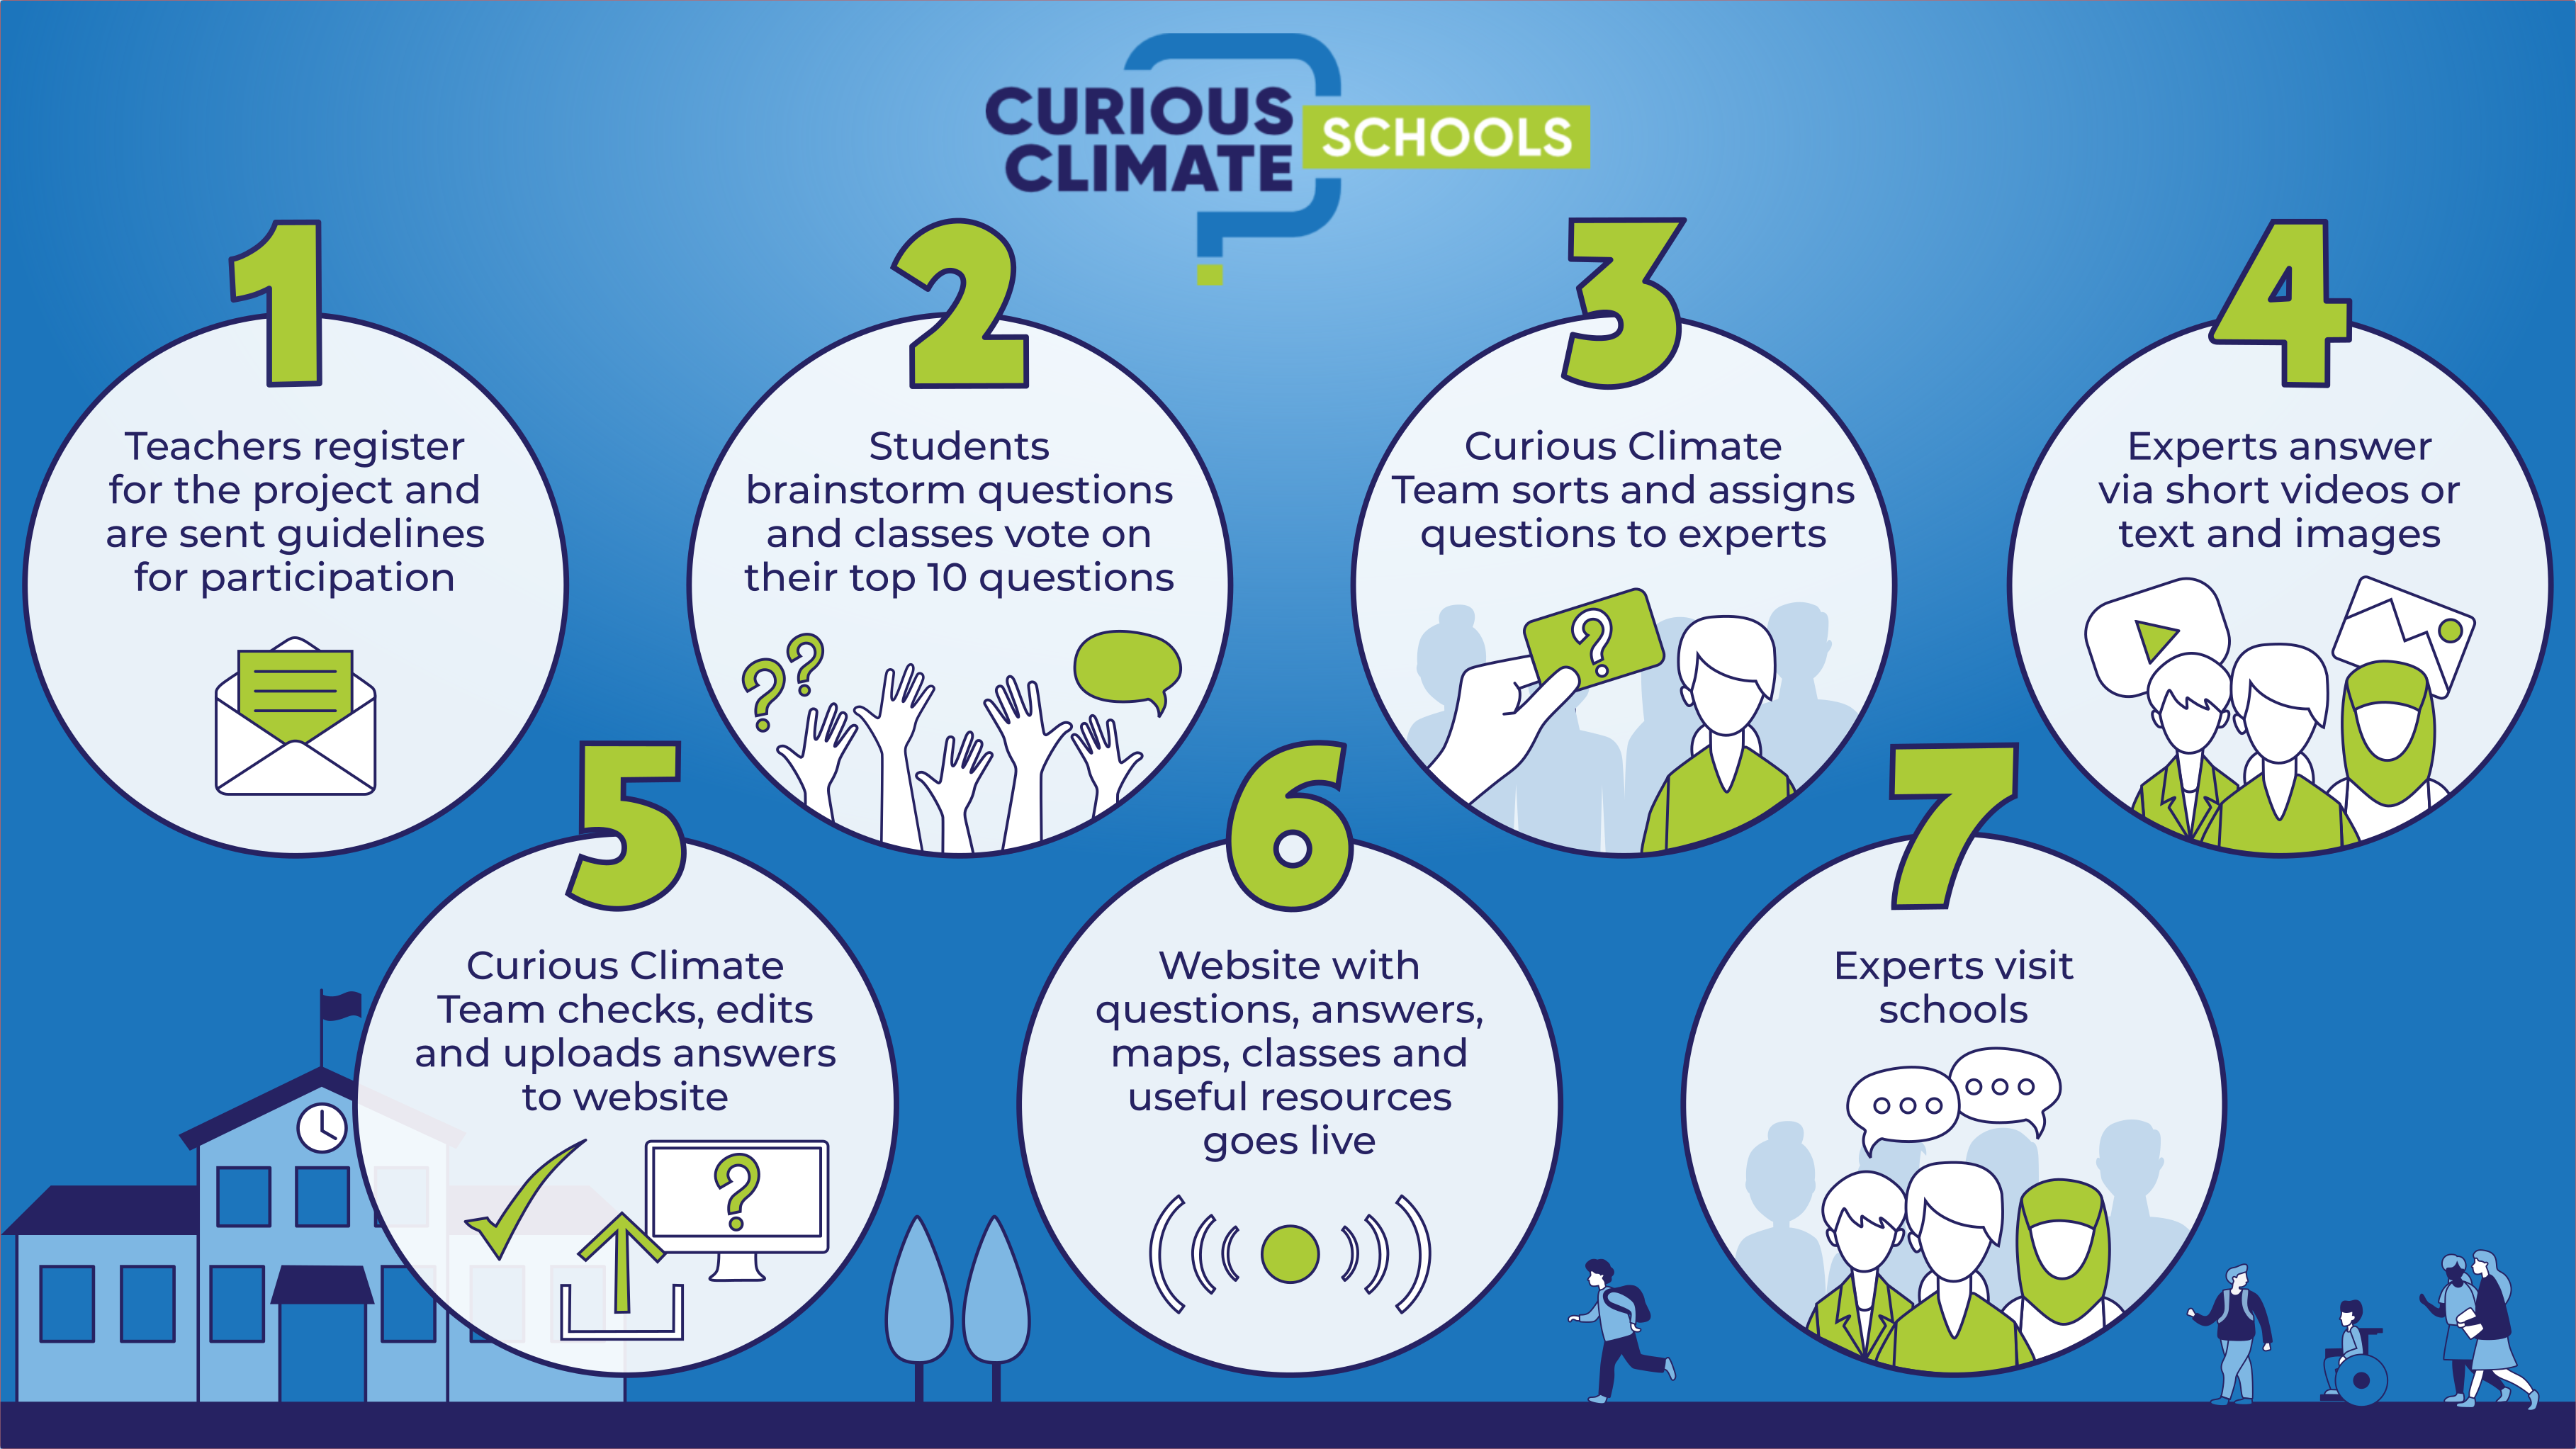 Curious climate schools modell